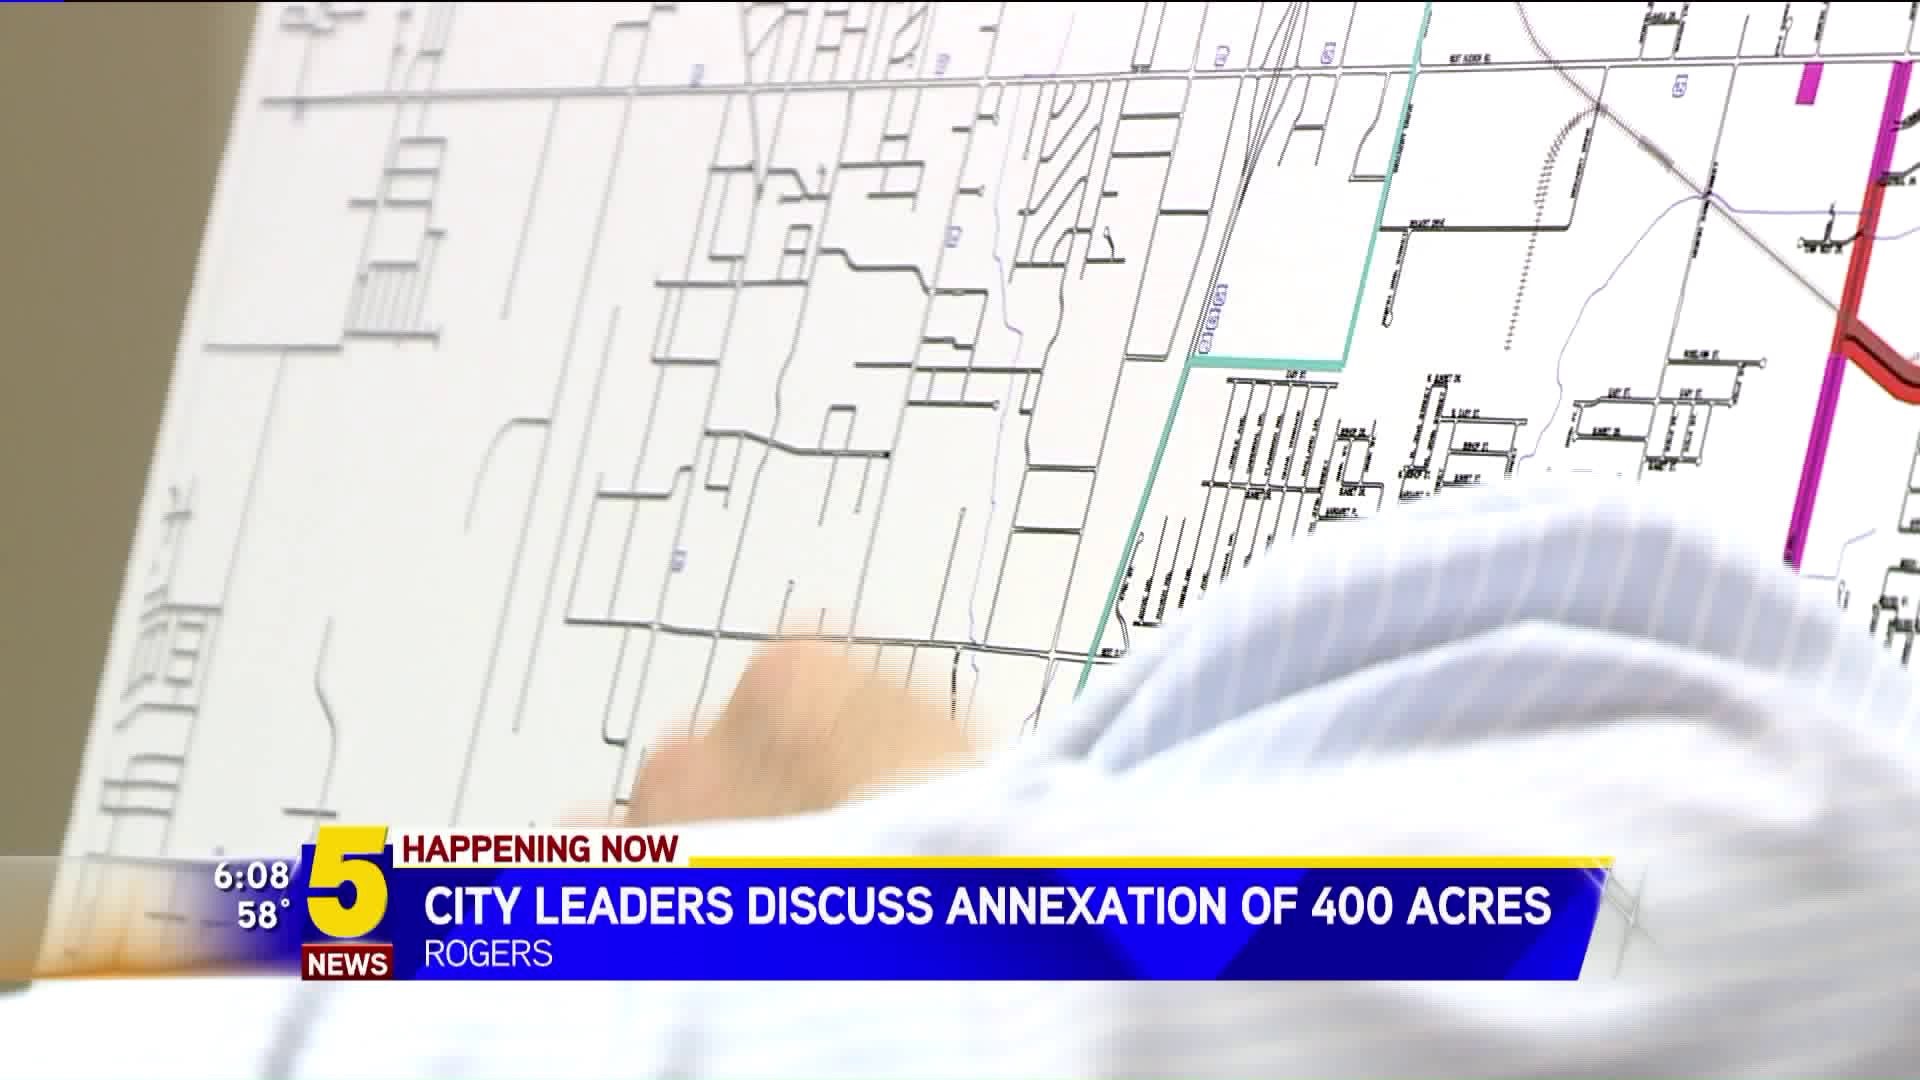 City Leaders Discuss Annexation Of 400 Acres